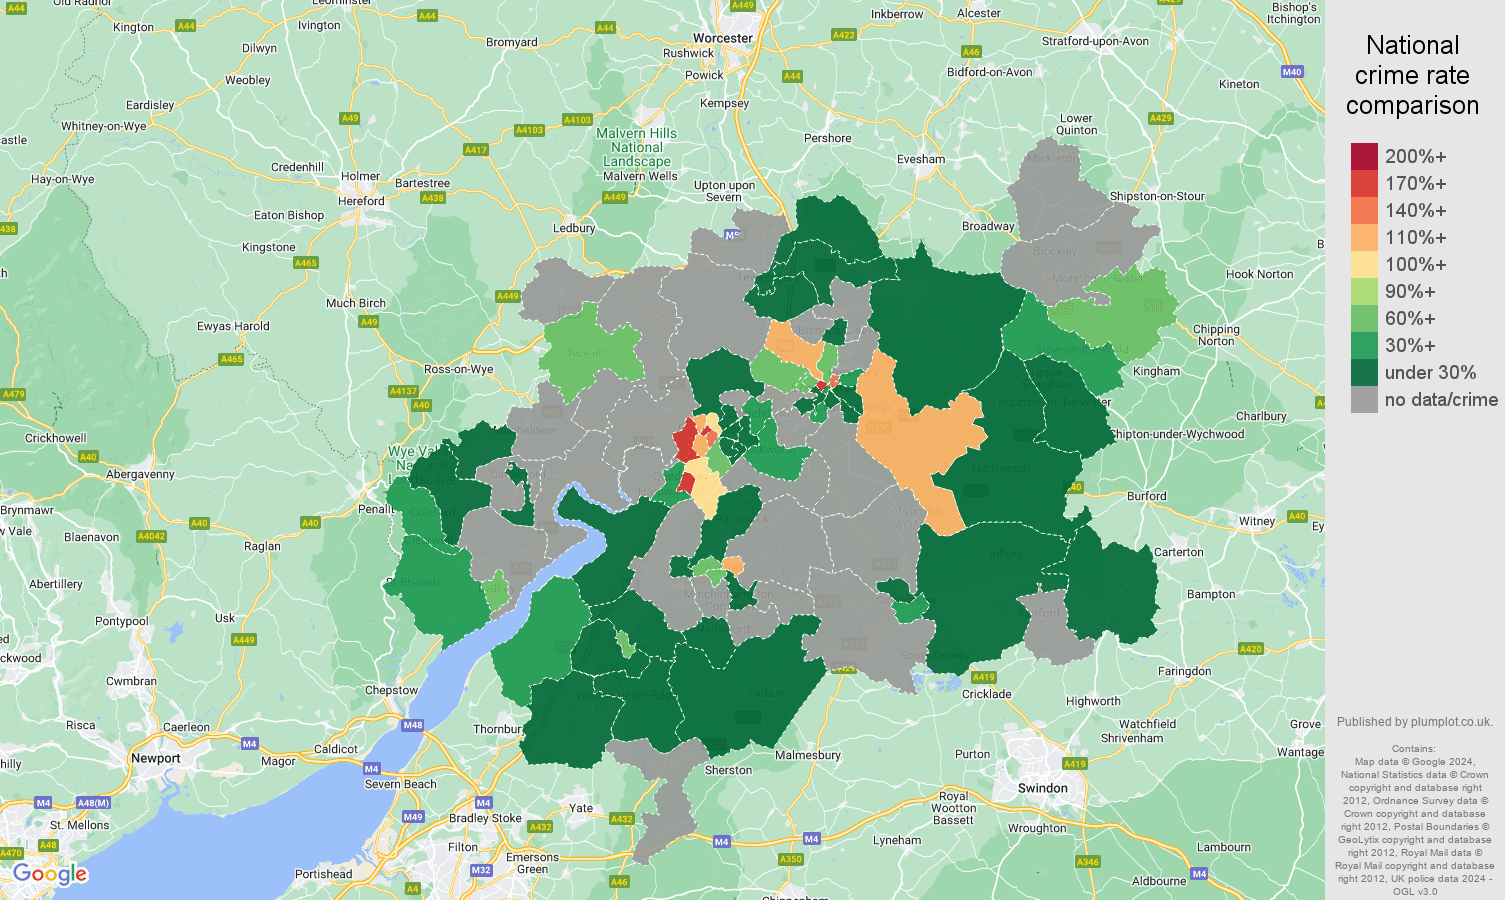 Gloucester robbery crime rate comparison map